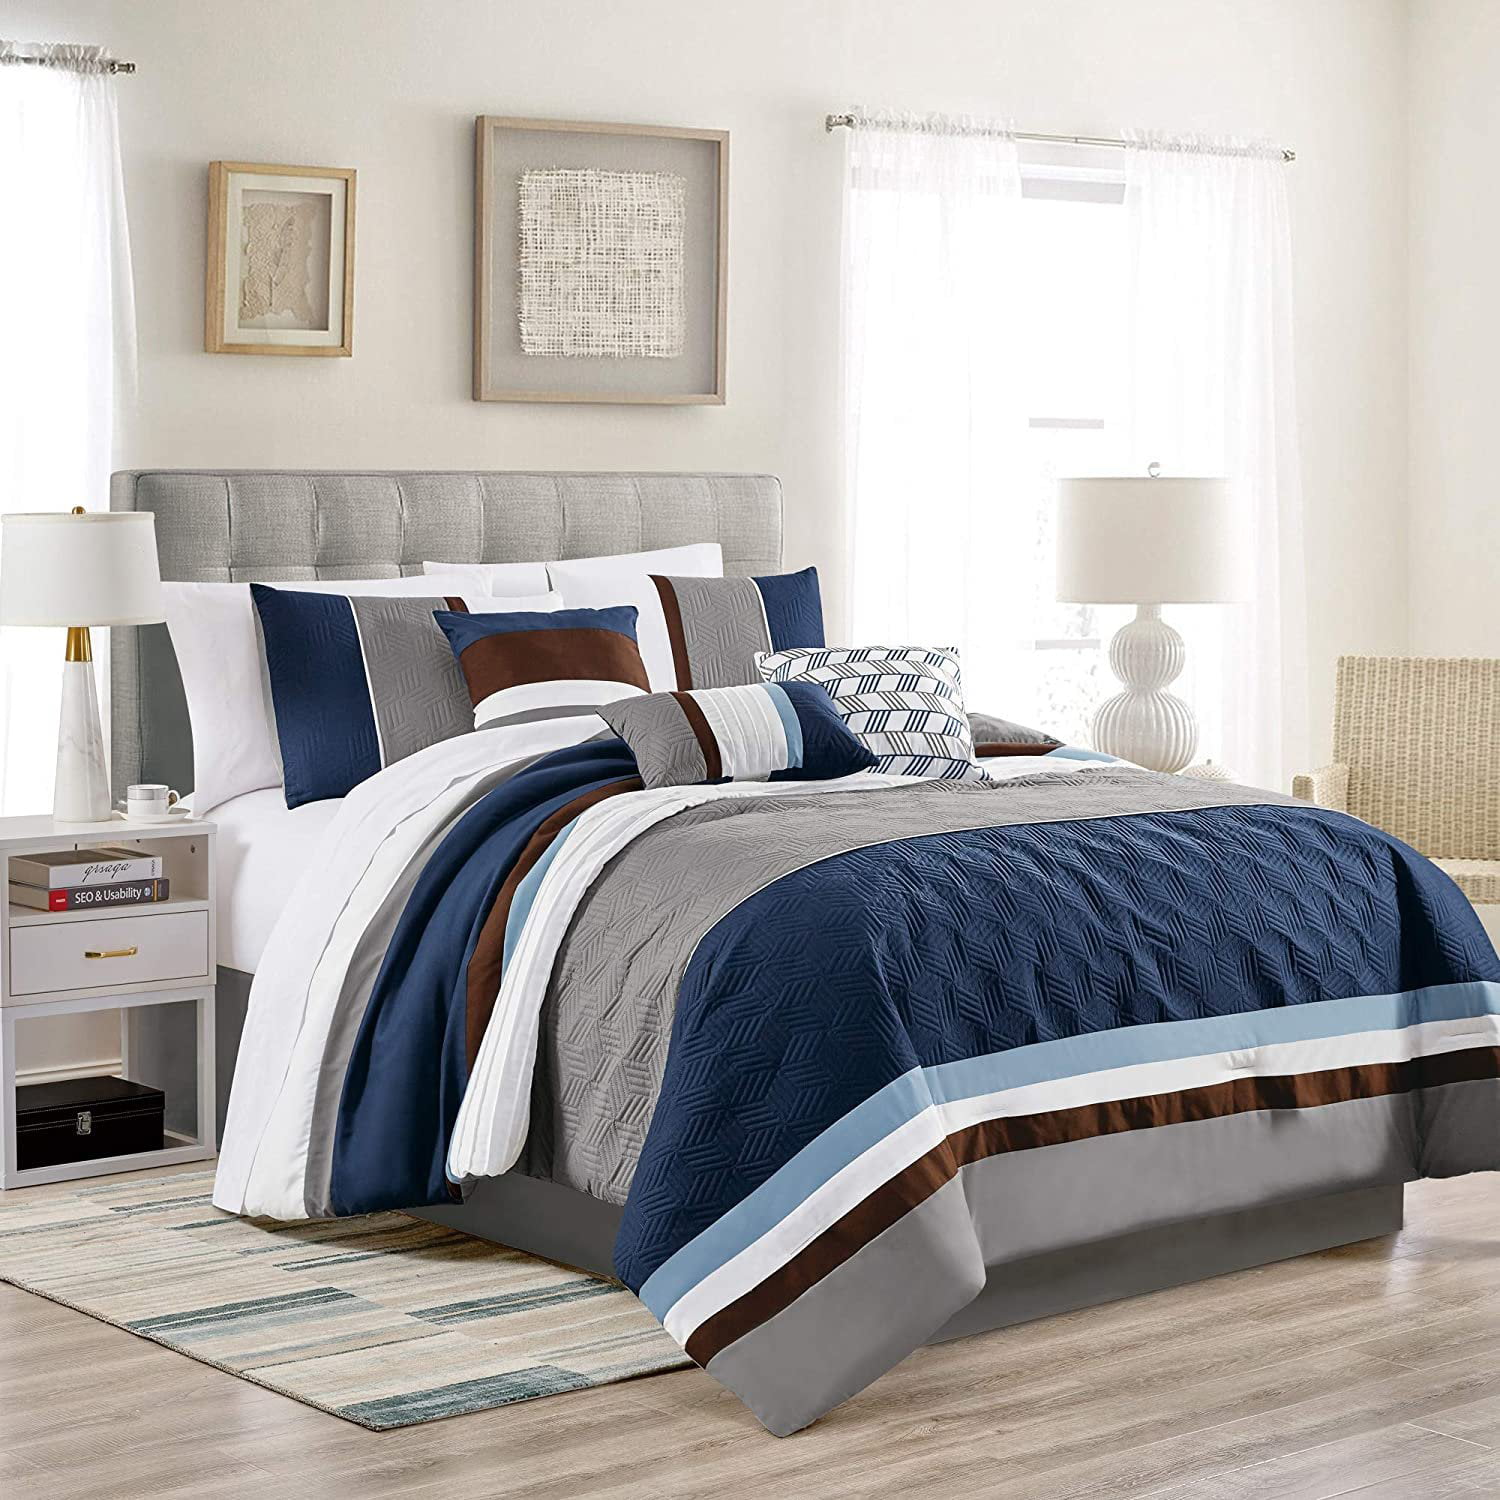 Bright Patterns Navy Blue Grey White, Light Blue And Brown Bedspread